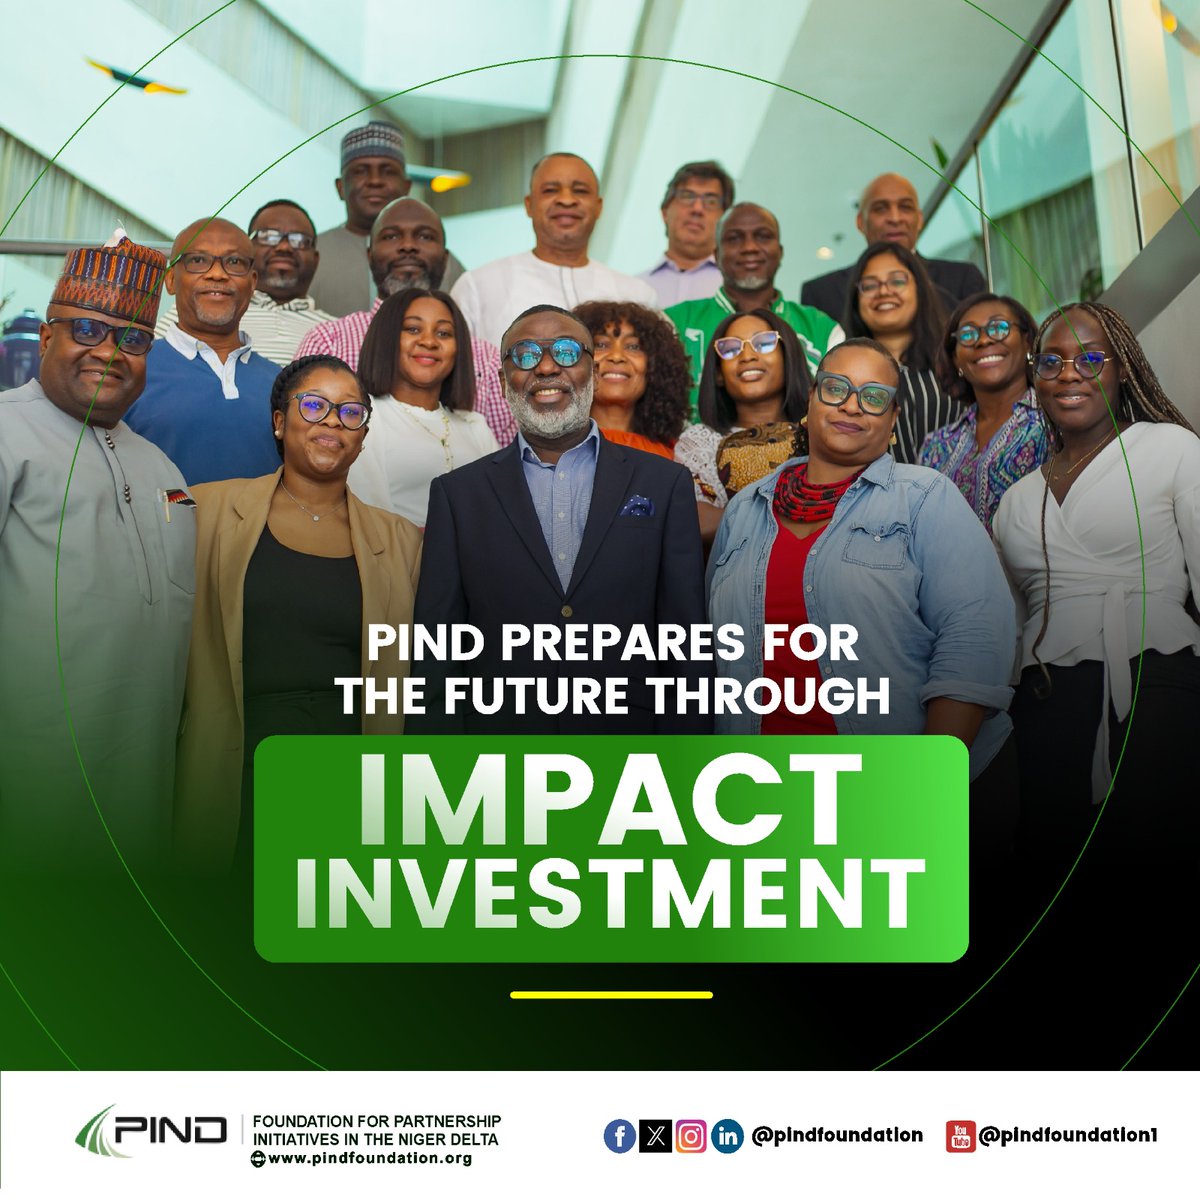 Big things happening at PIND! Wrapping up phase 3, gearing up for what's next. Hosting impact investment workshops for our team & partners. Let's keep pushing for impactful change together. #pindfoundation